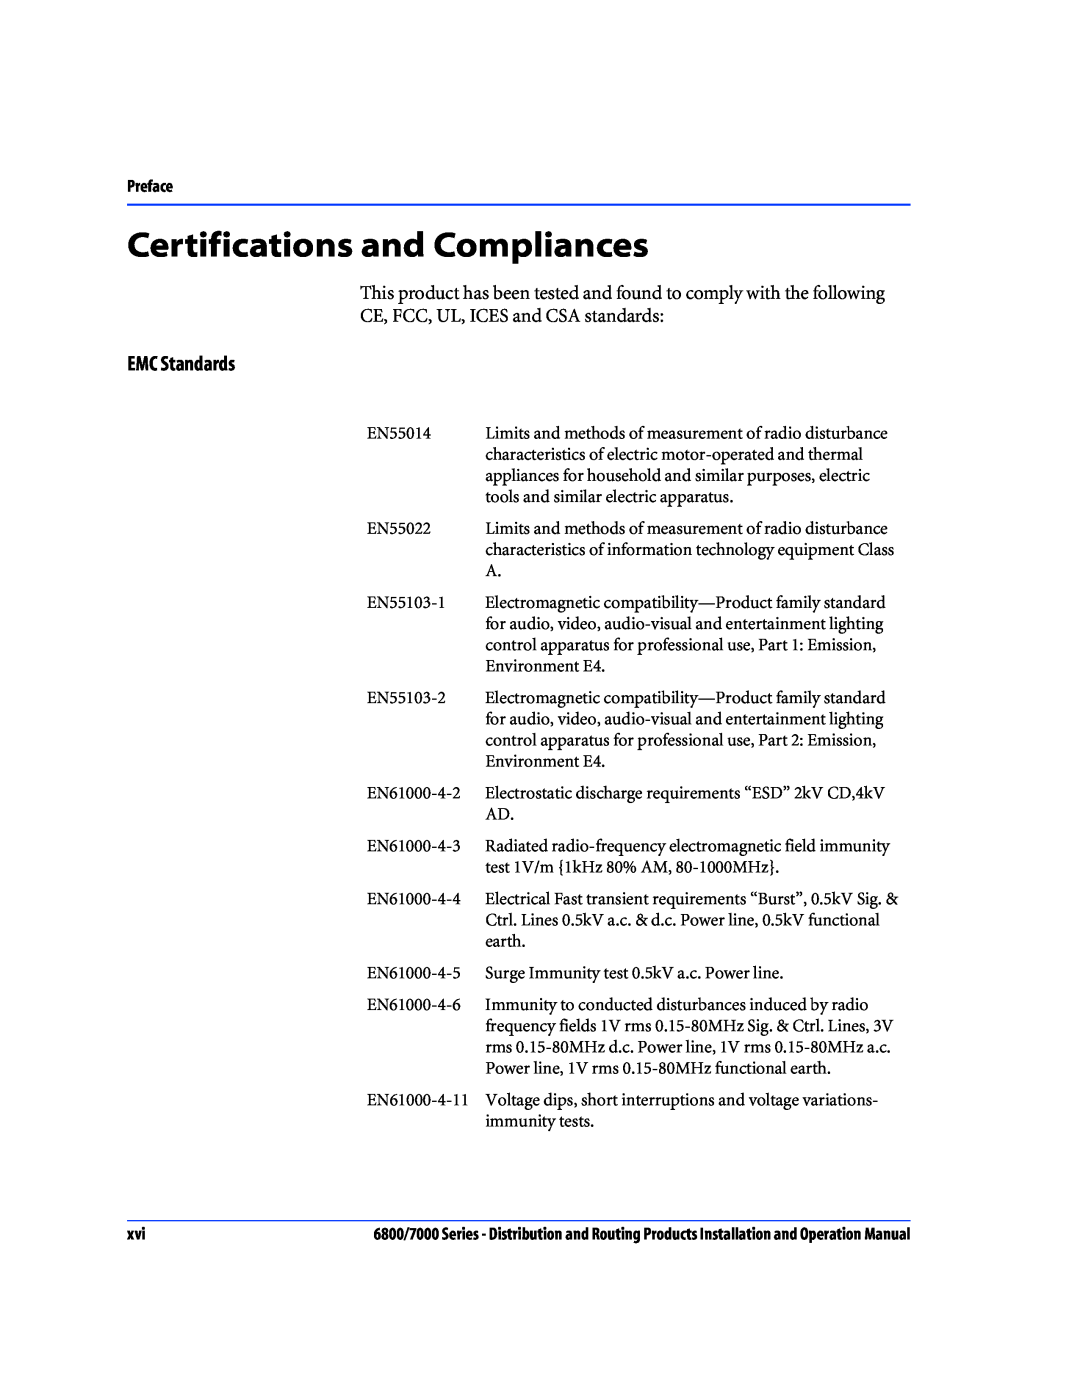 Nokia 7000 Series, 6800 Series operation manual Certifications and Compliances, EMC Standards 